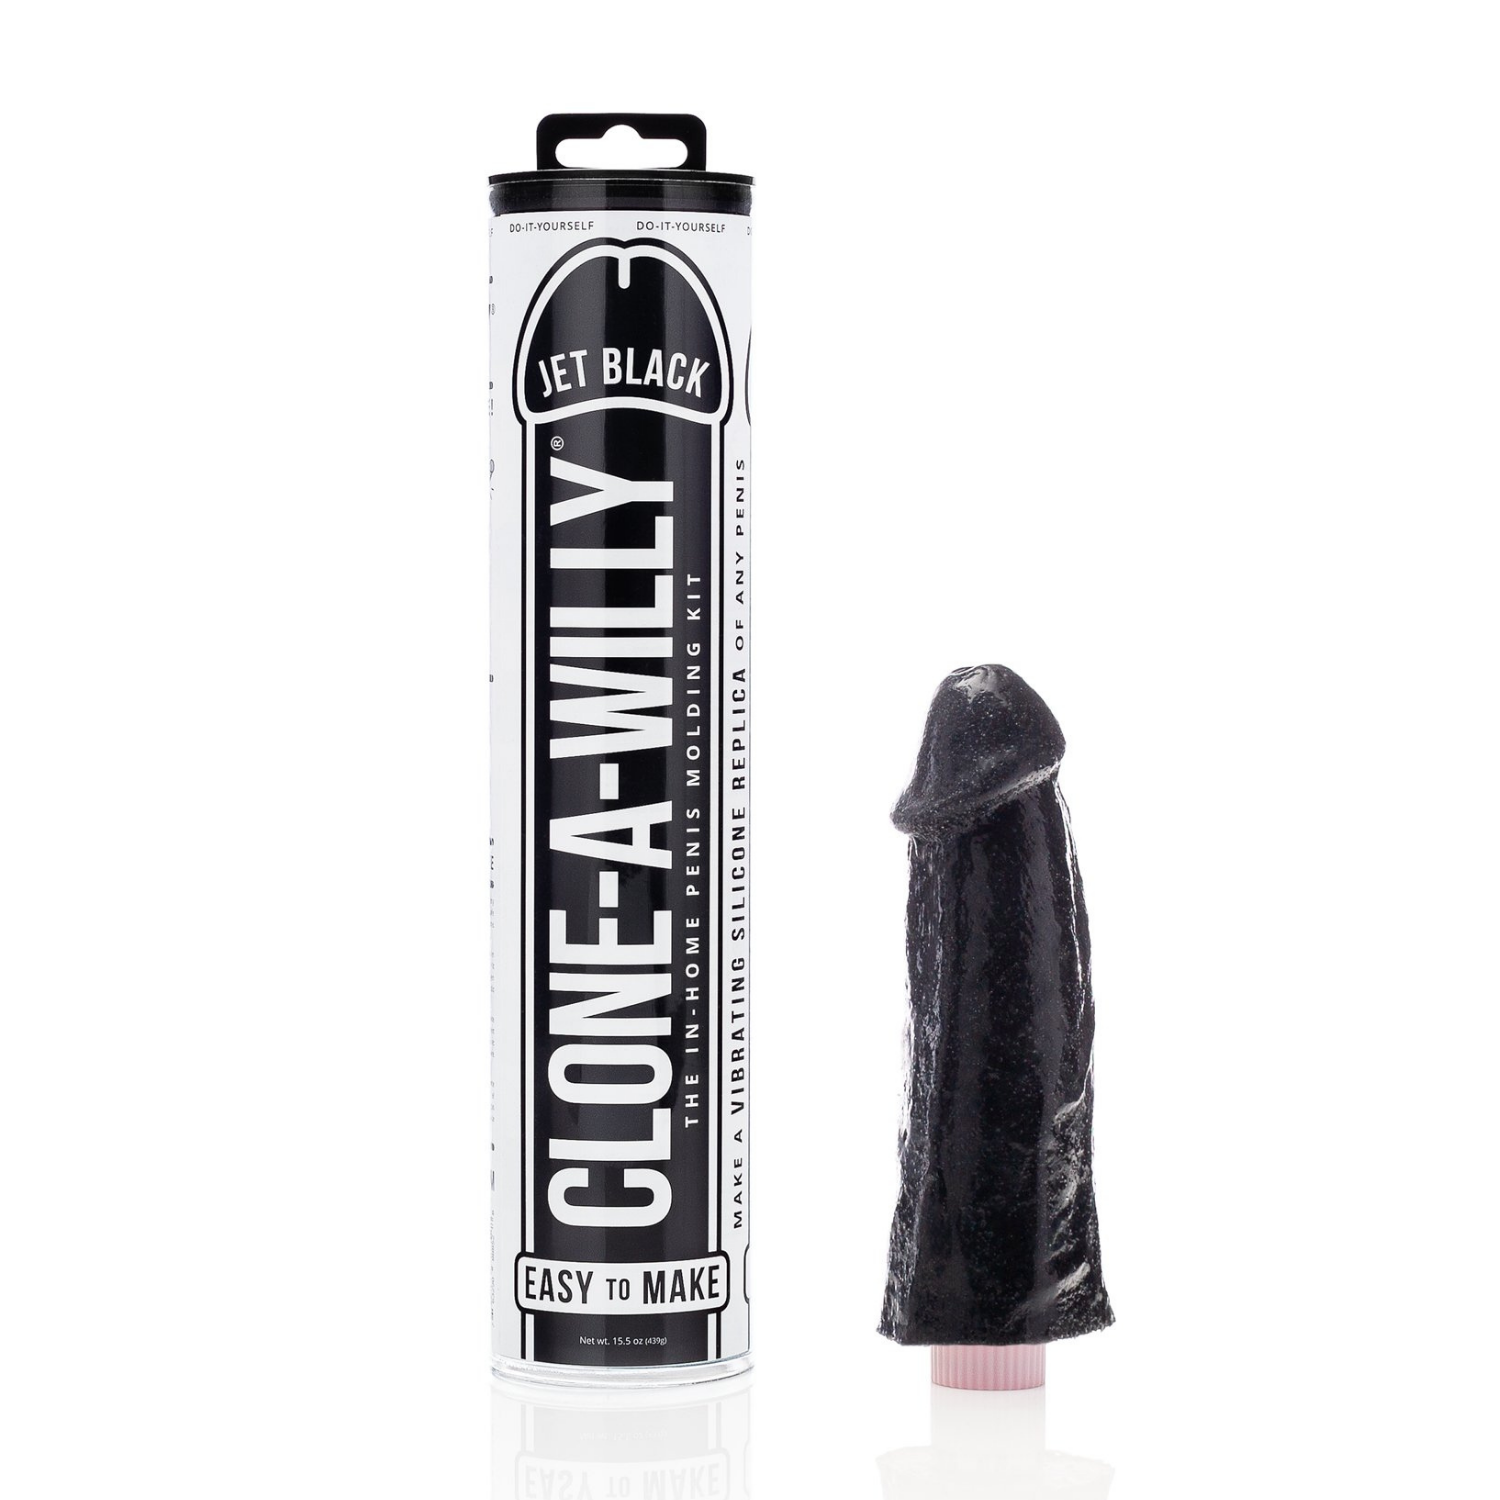 Empire Labs Vibrating Clone-A-Willy Jet Black-Dildos-Empire Labs-XOXTOYS